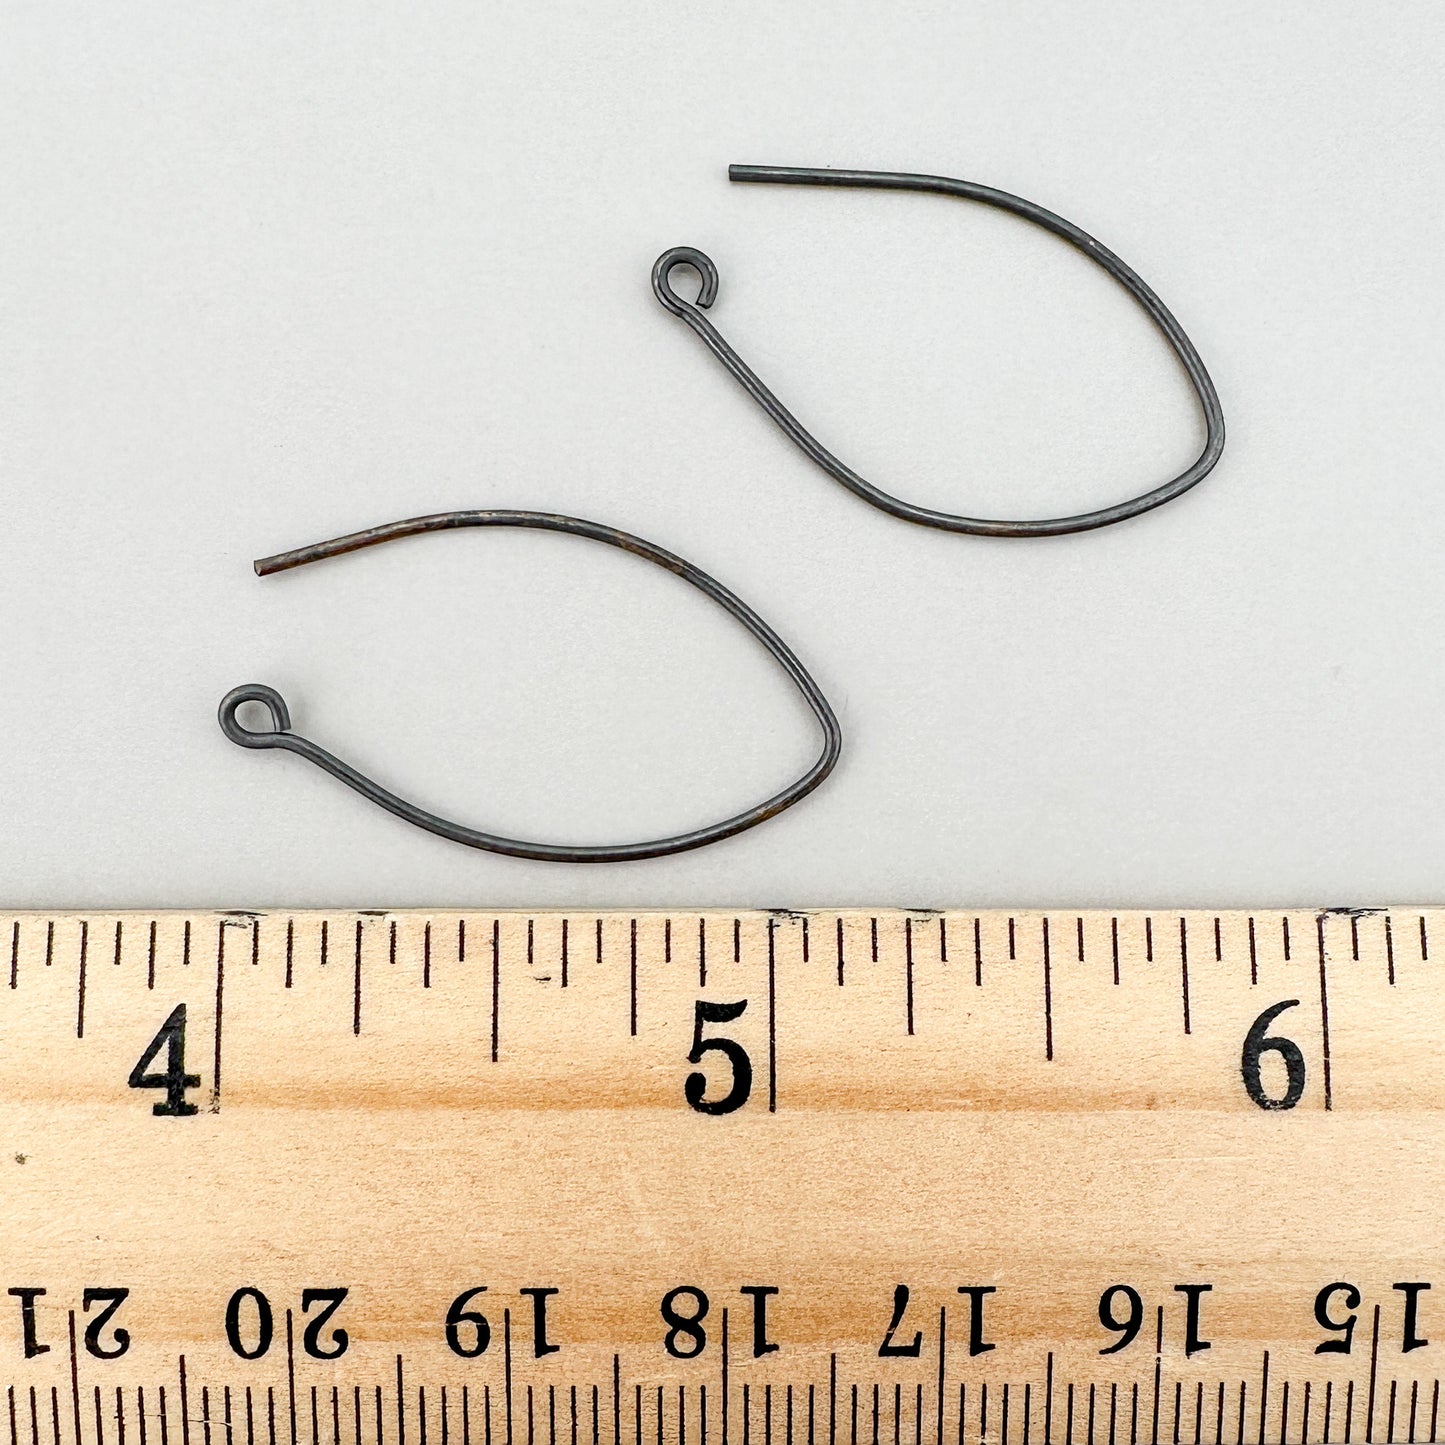 28x13mm Oval Pointed Earwire (Oxidized Thai Silver) - 2 pcs. (M1068)